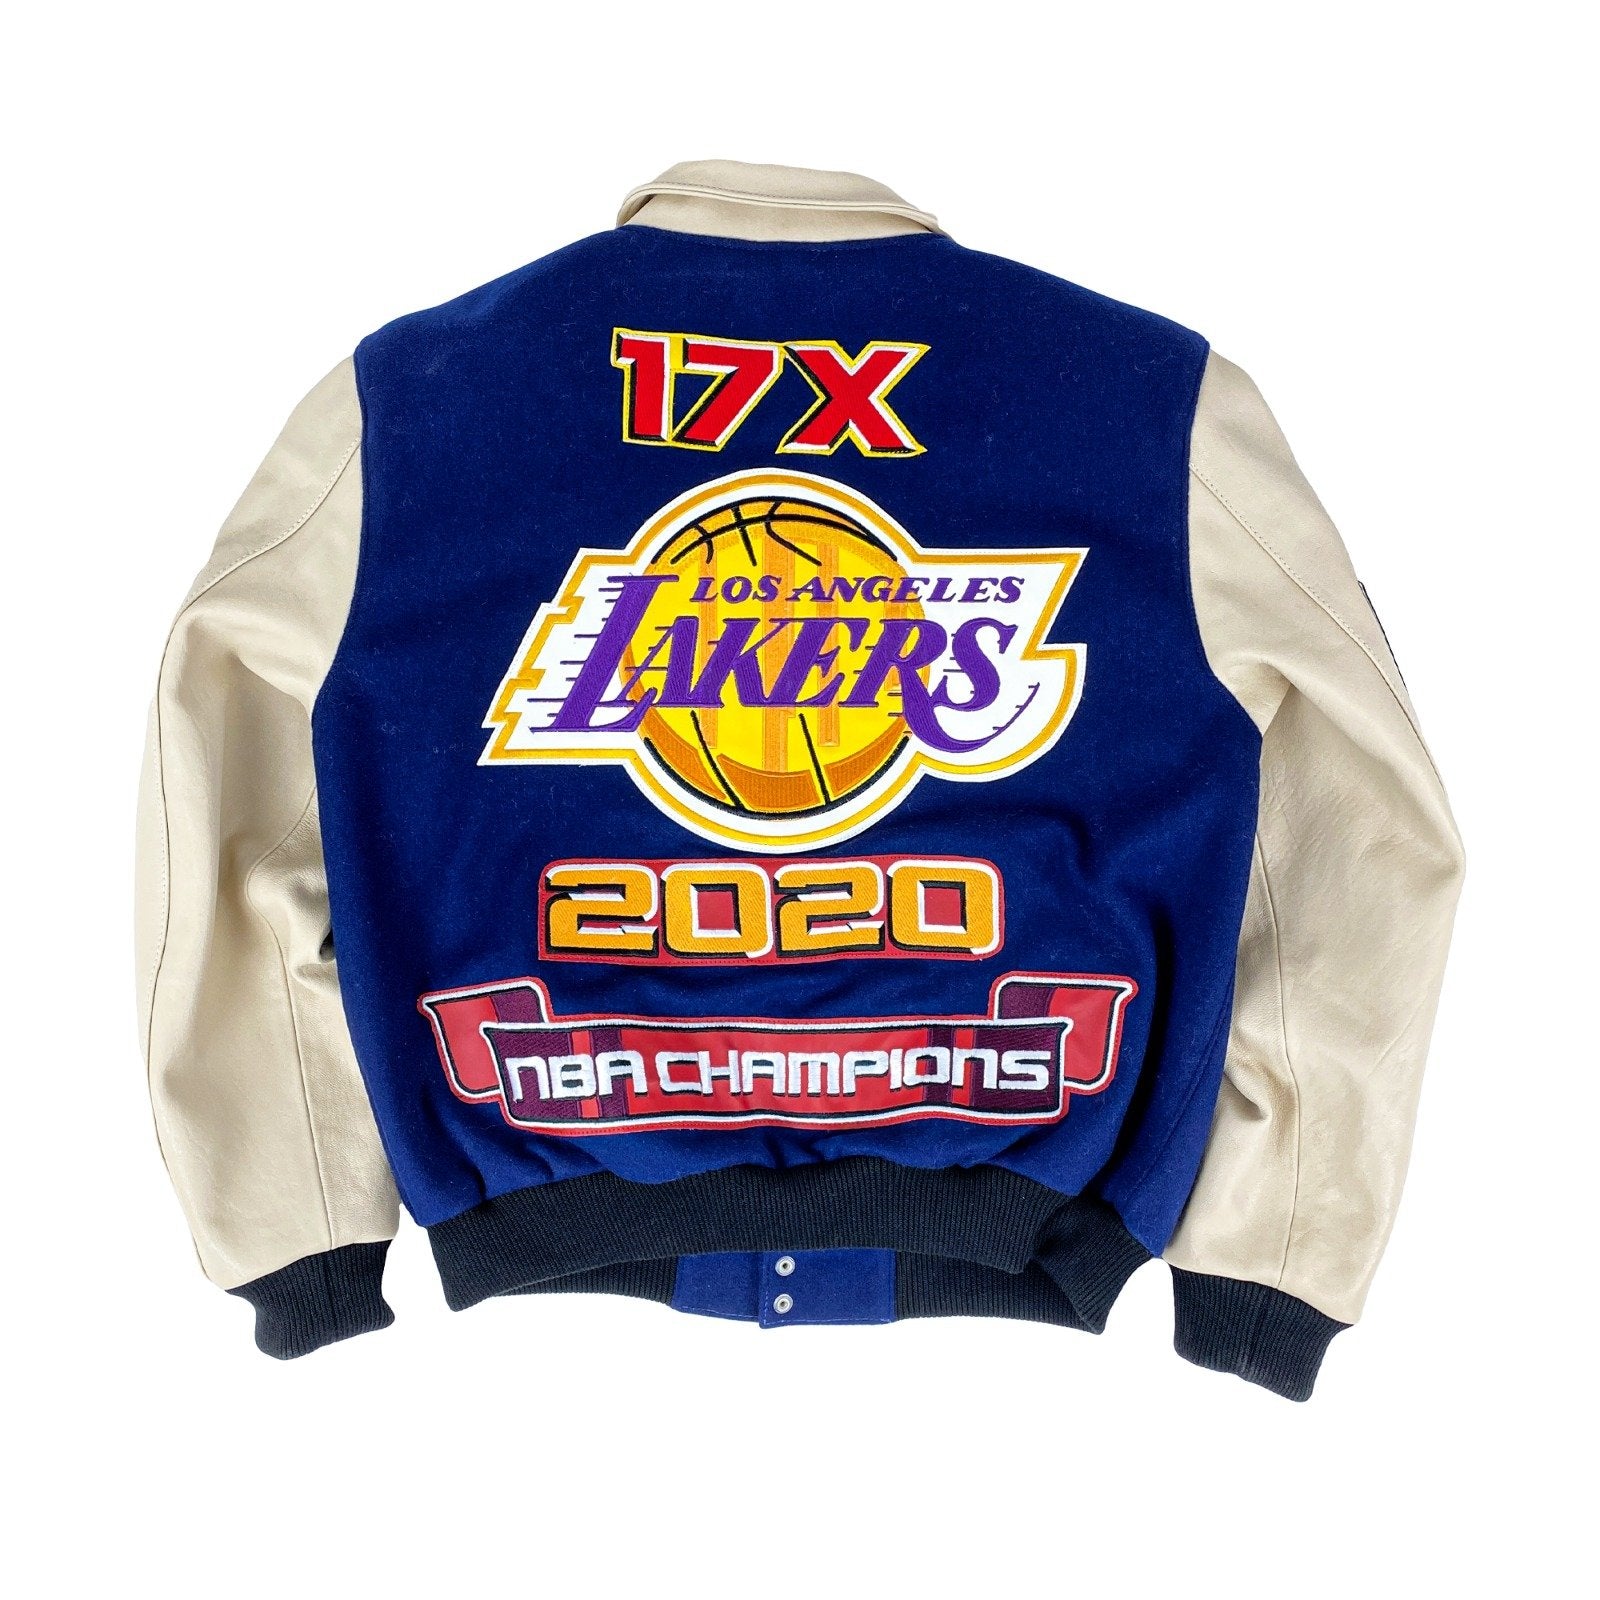 Jeff Hamilton - Introducing the wool & leather 2020 Lakers